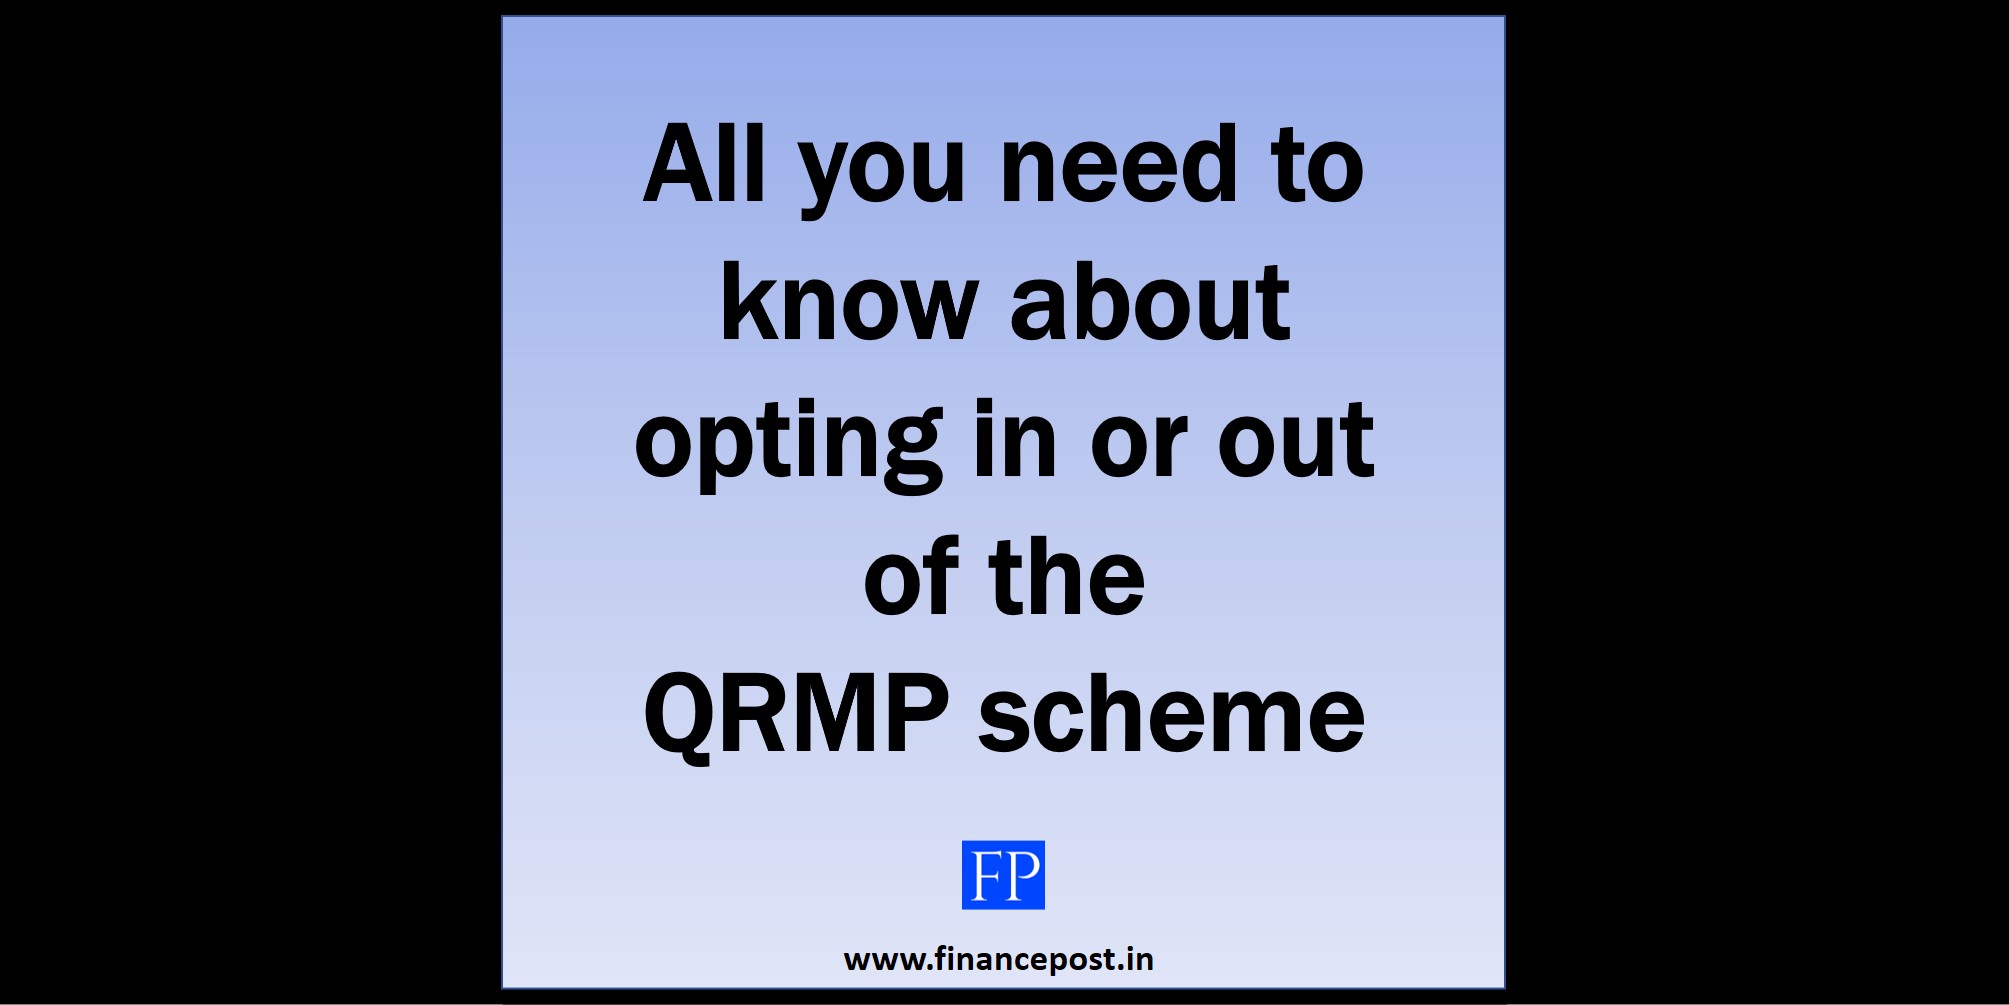 All you need to know about opting in or out of the qrmp scheme